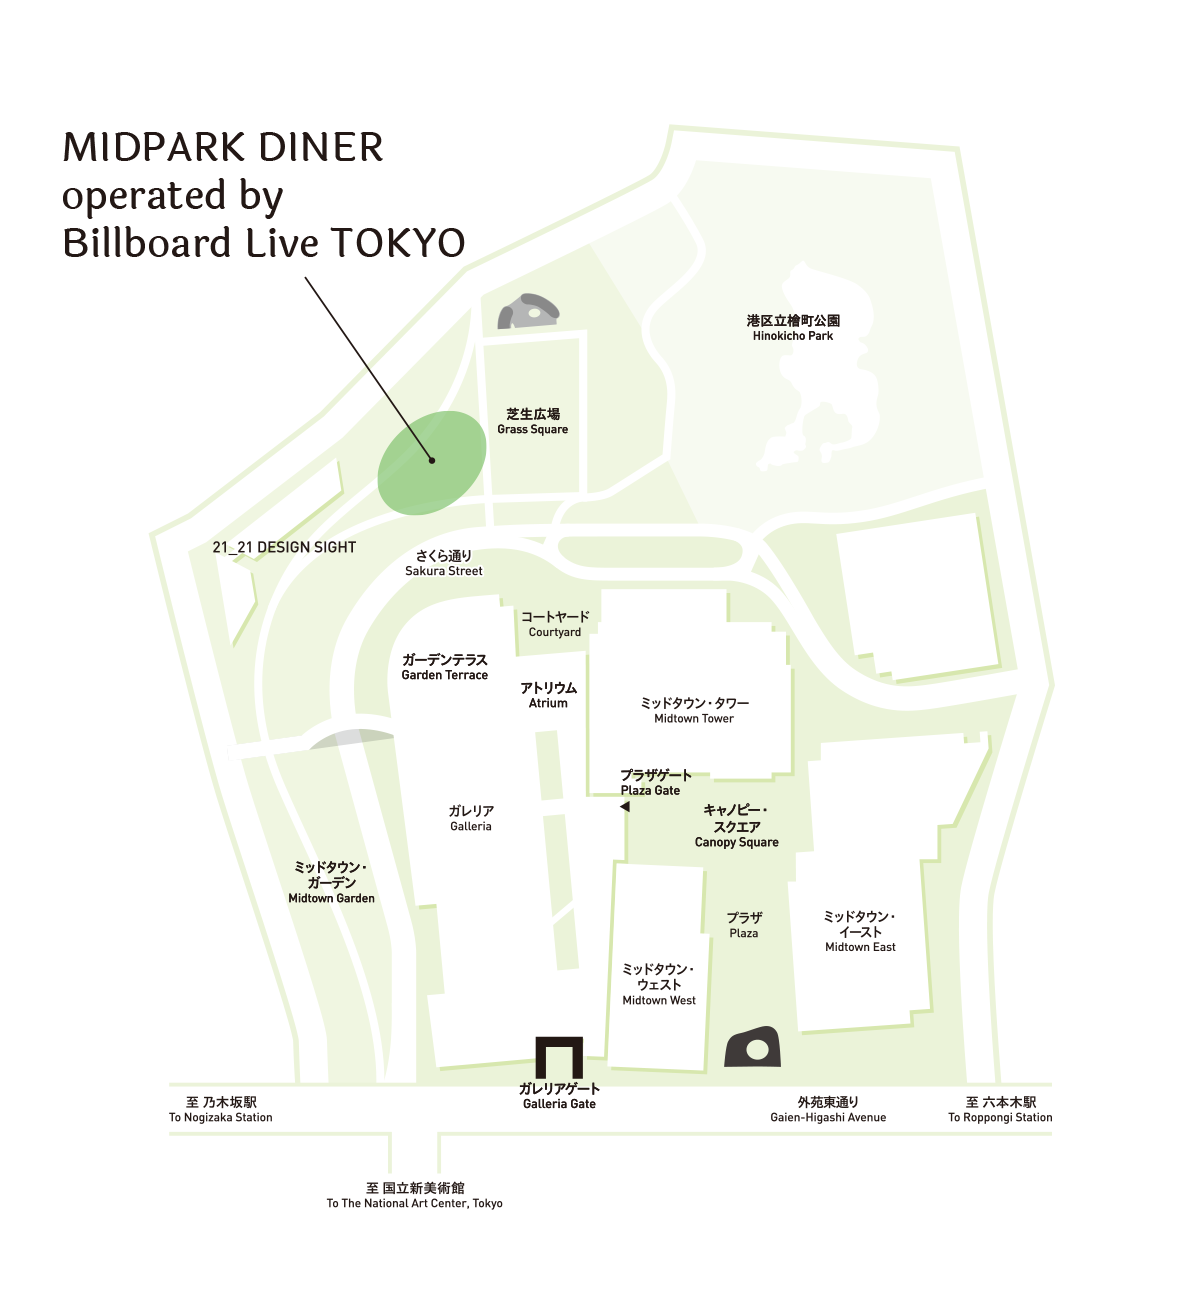 MIDPARK DINER operated by Billboard Live TOKYO